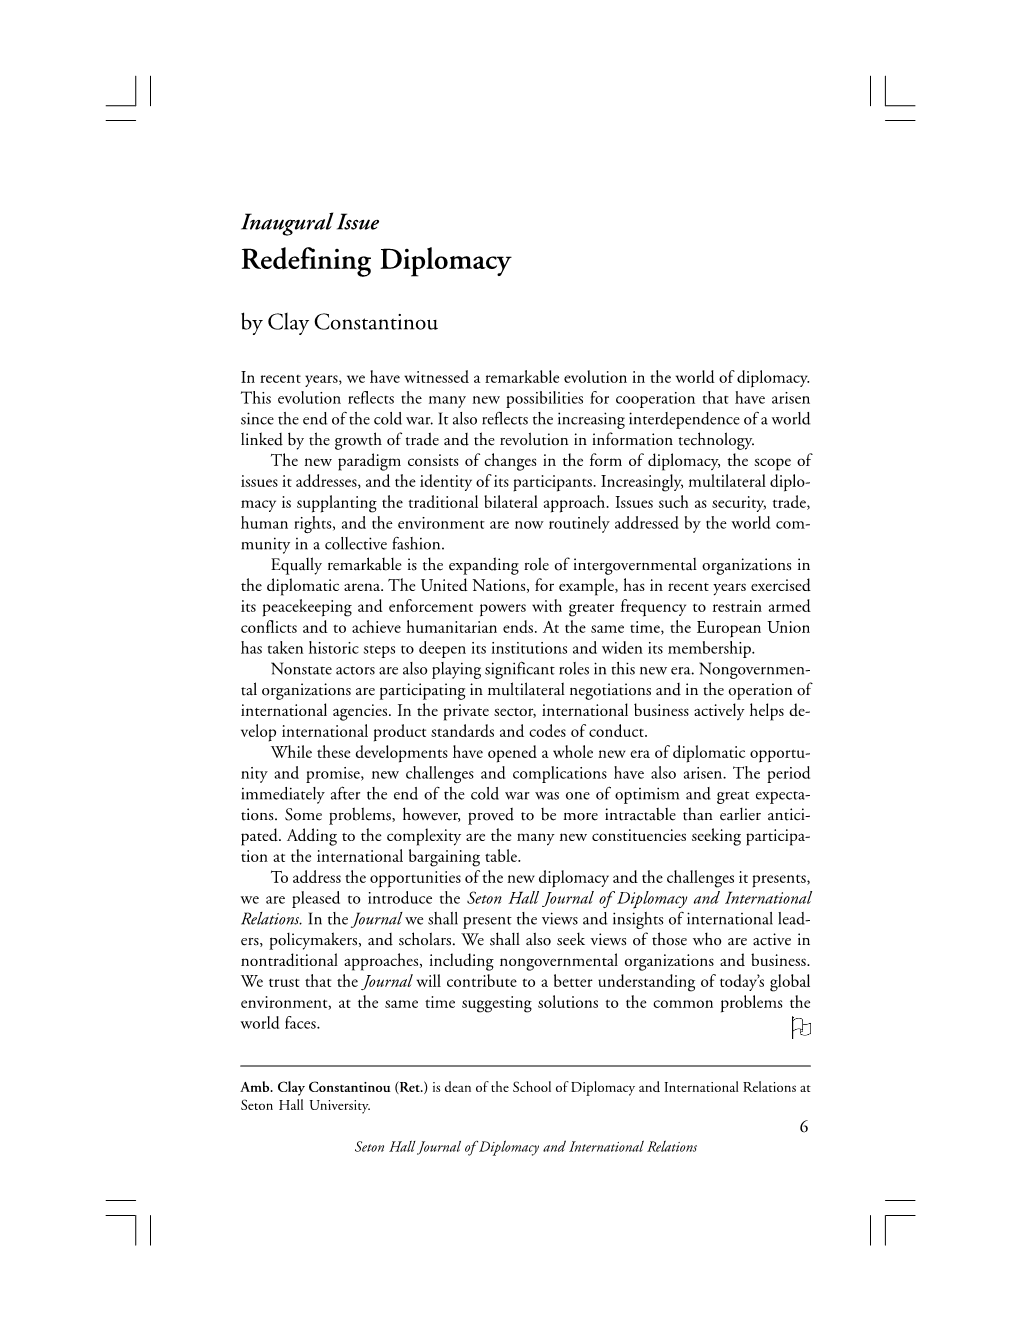 Inaugural Issue: Redefining Diplomacy